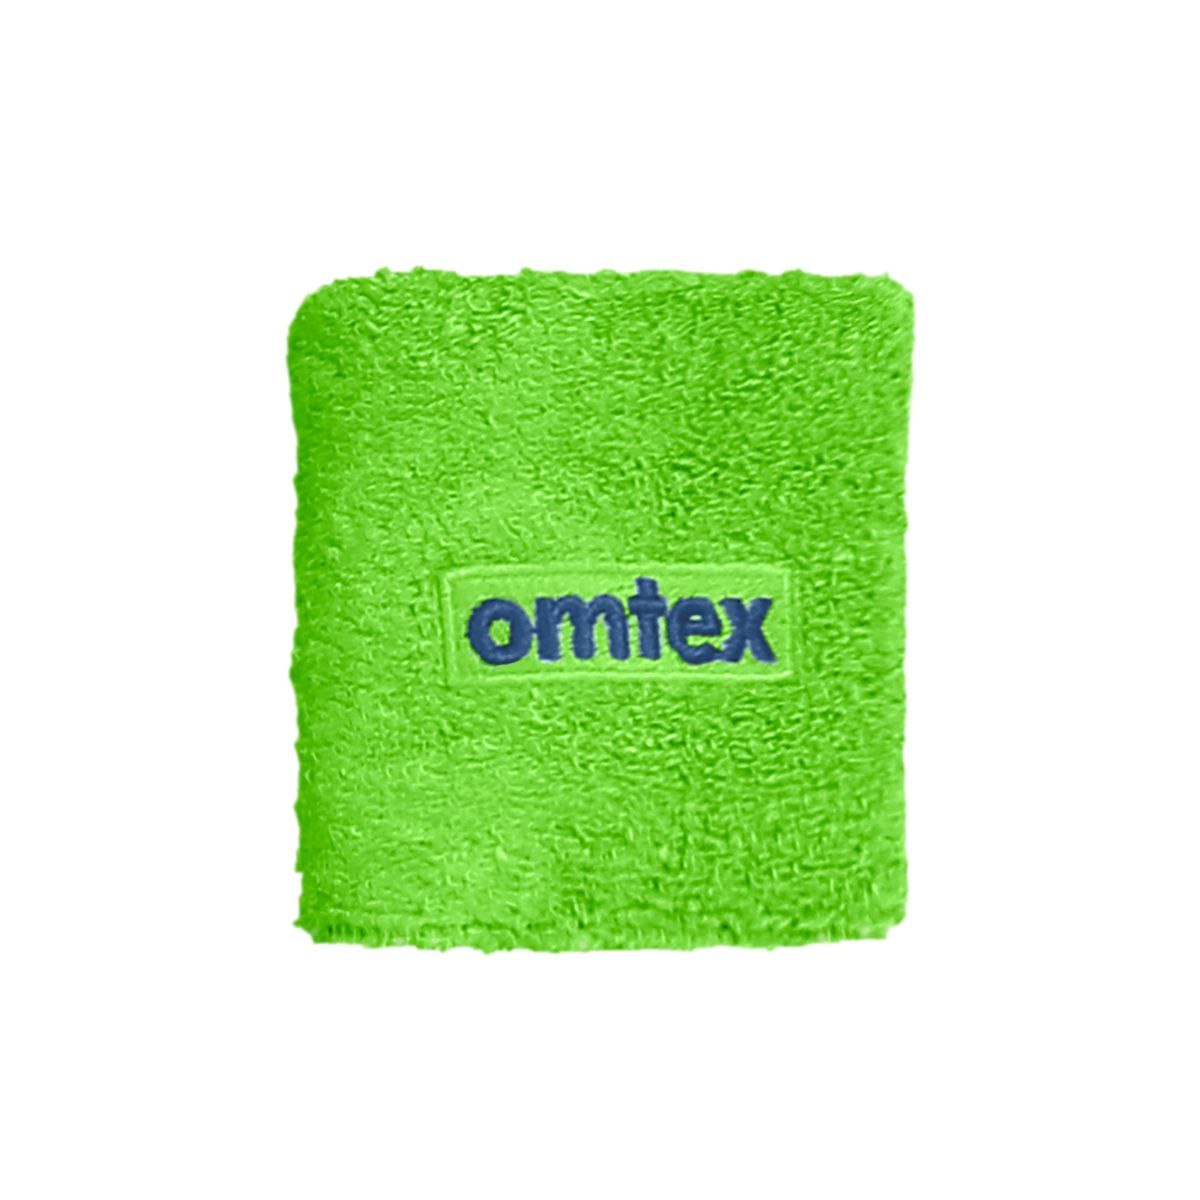     			Omtex - Green Cotton Wrist Band ( 3 Pairs )